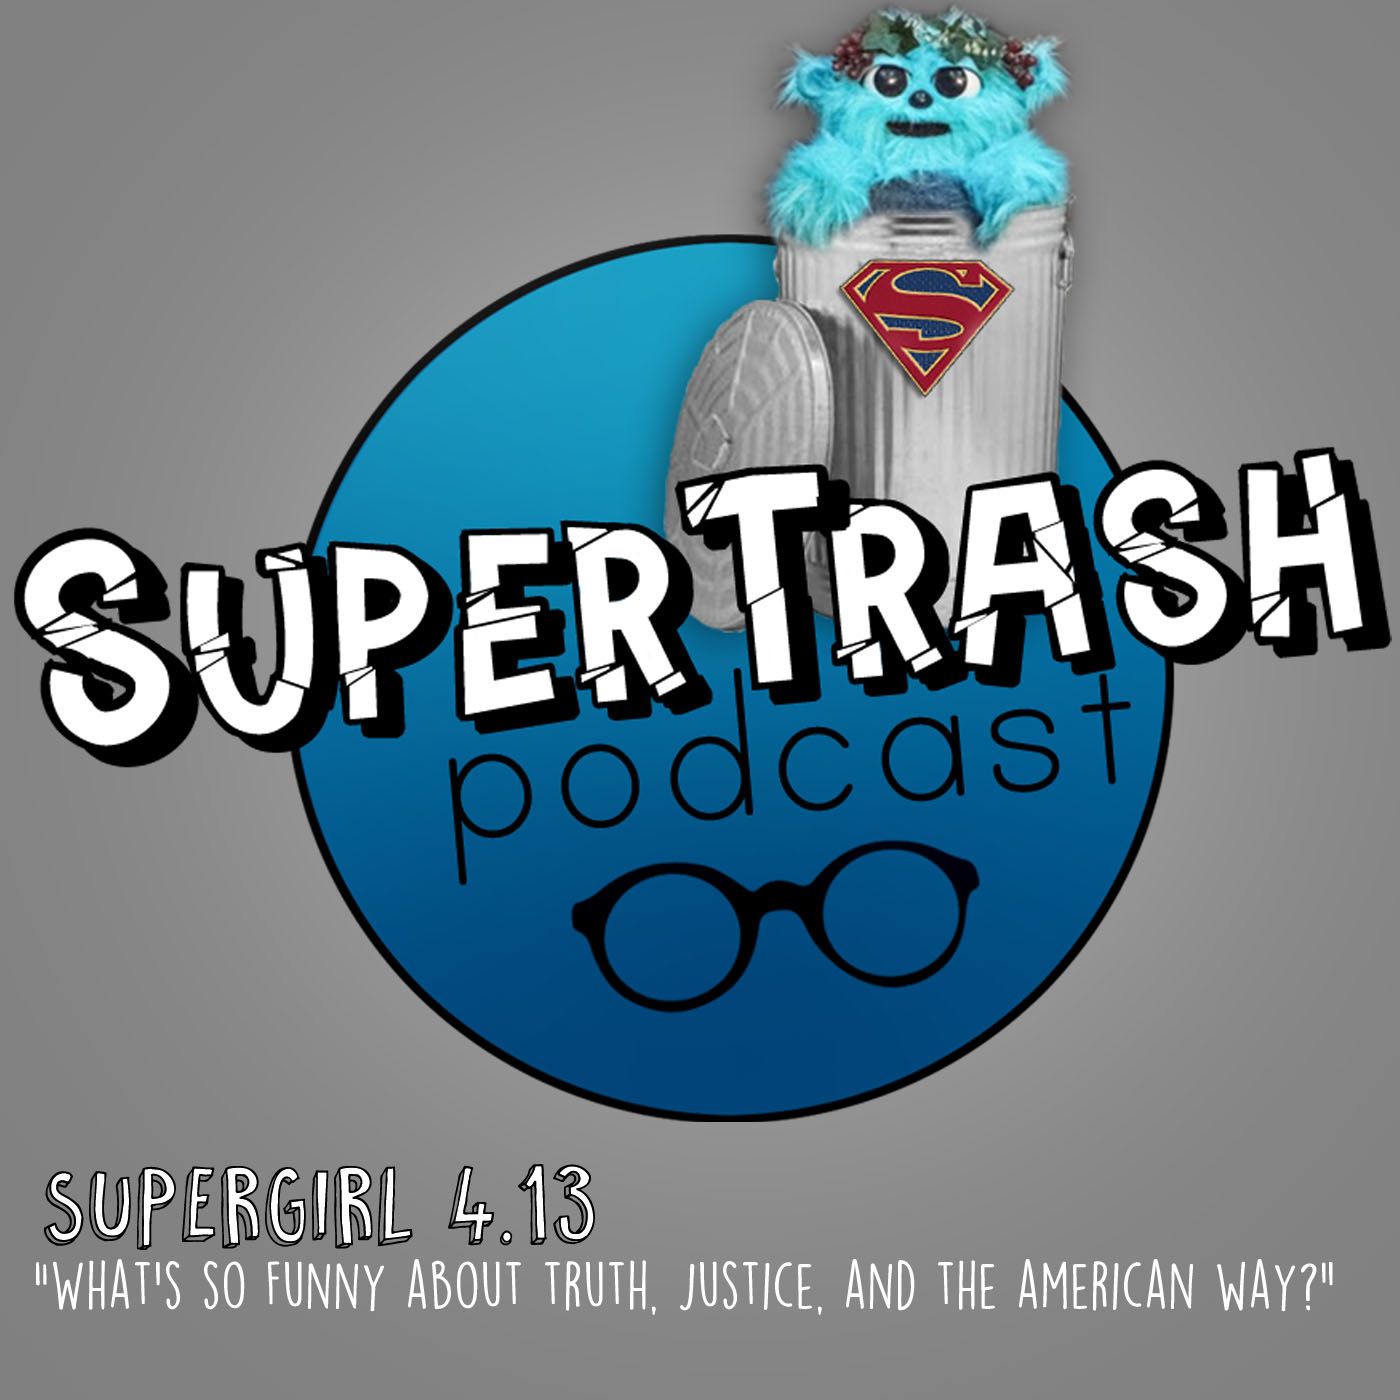 Supertrash: Supergirl 4.13 ”What’s So Funny About Truth, Justice, and the American Way?!?!”